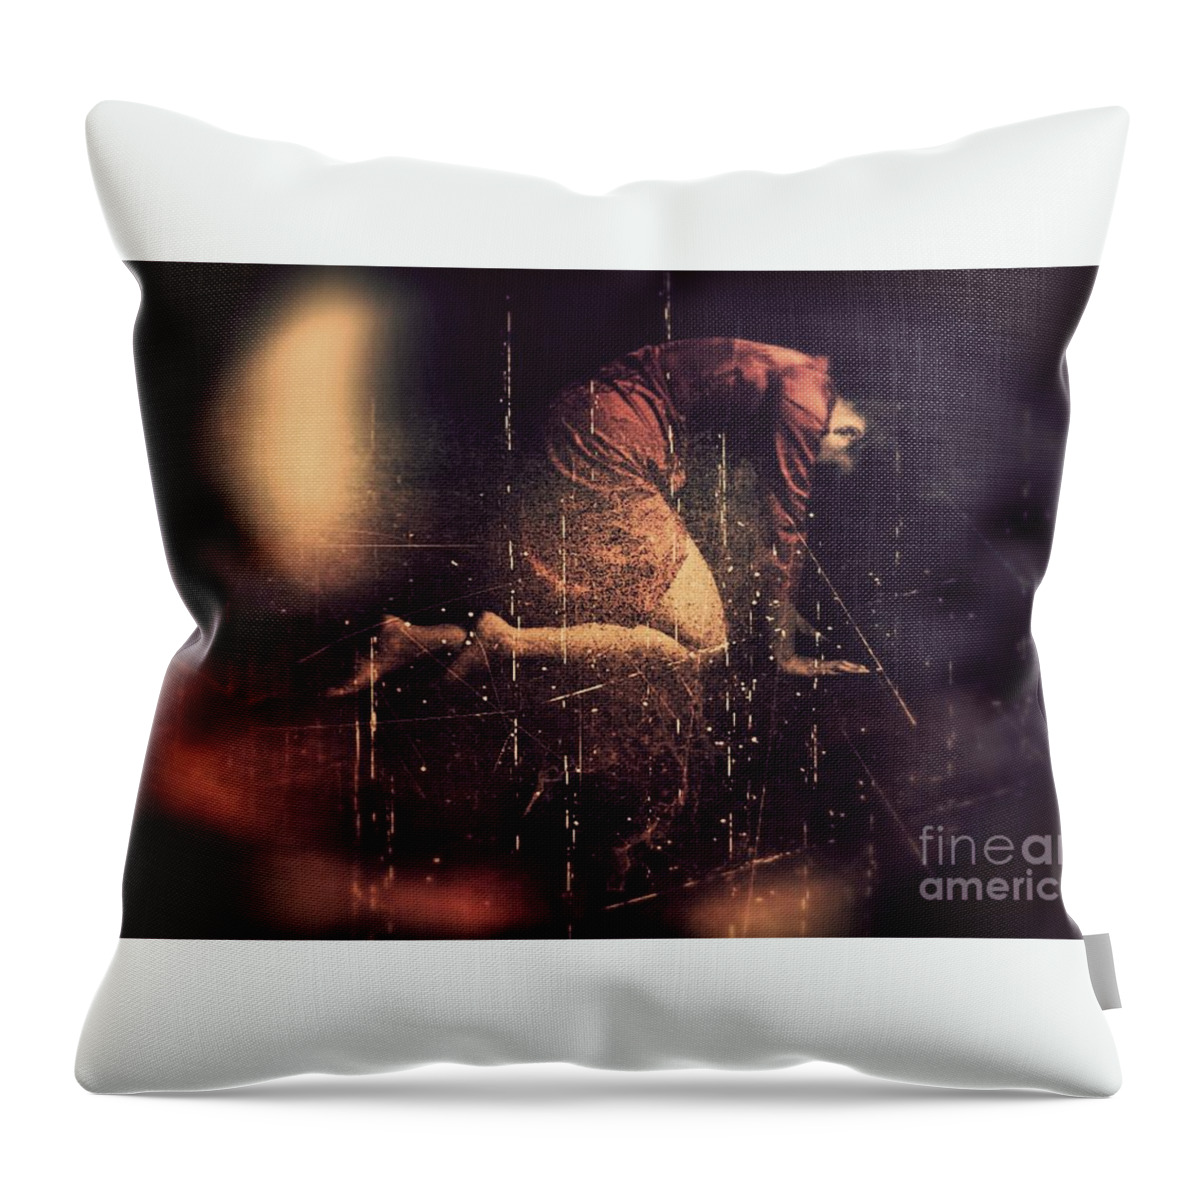  Throw Pillow featuring the photograph Defeated by Jessica S